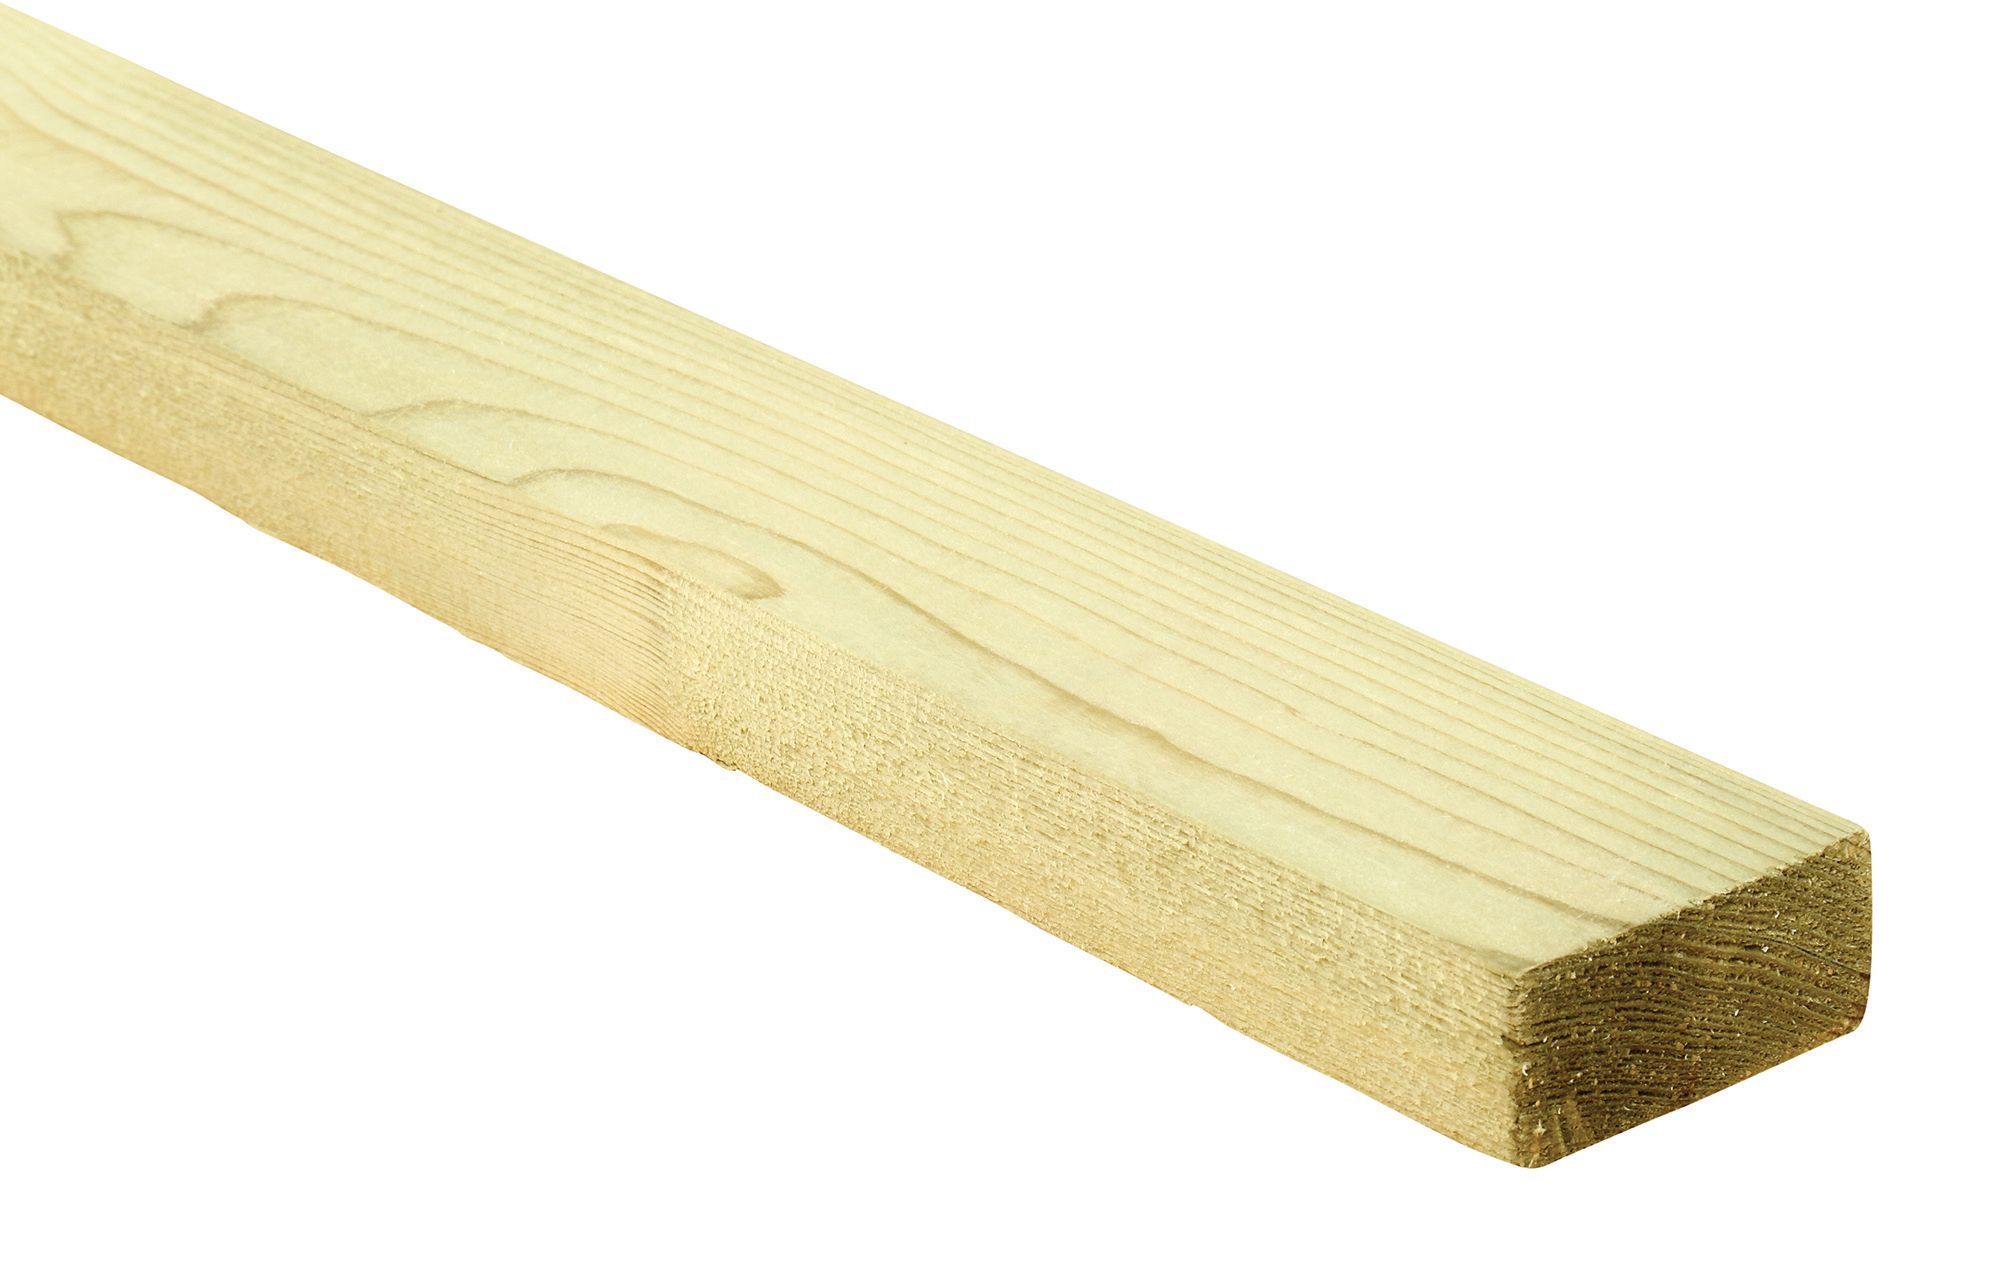 Image of Wickes Treated Sawn Timber - 22mm x 47mm x 2400mm